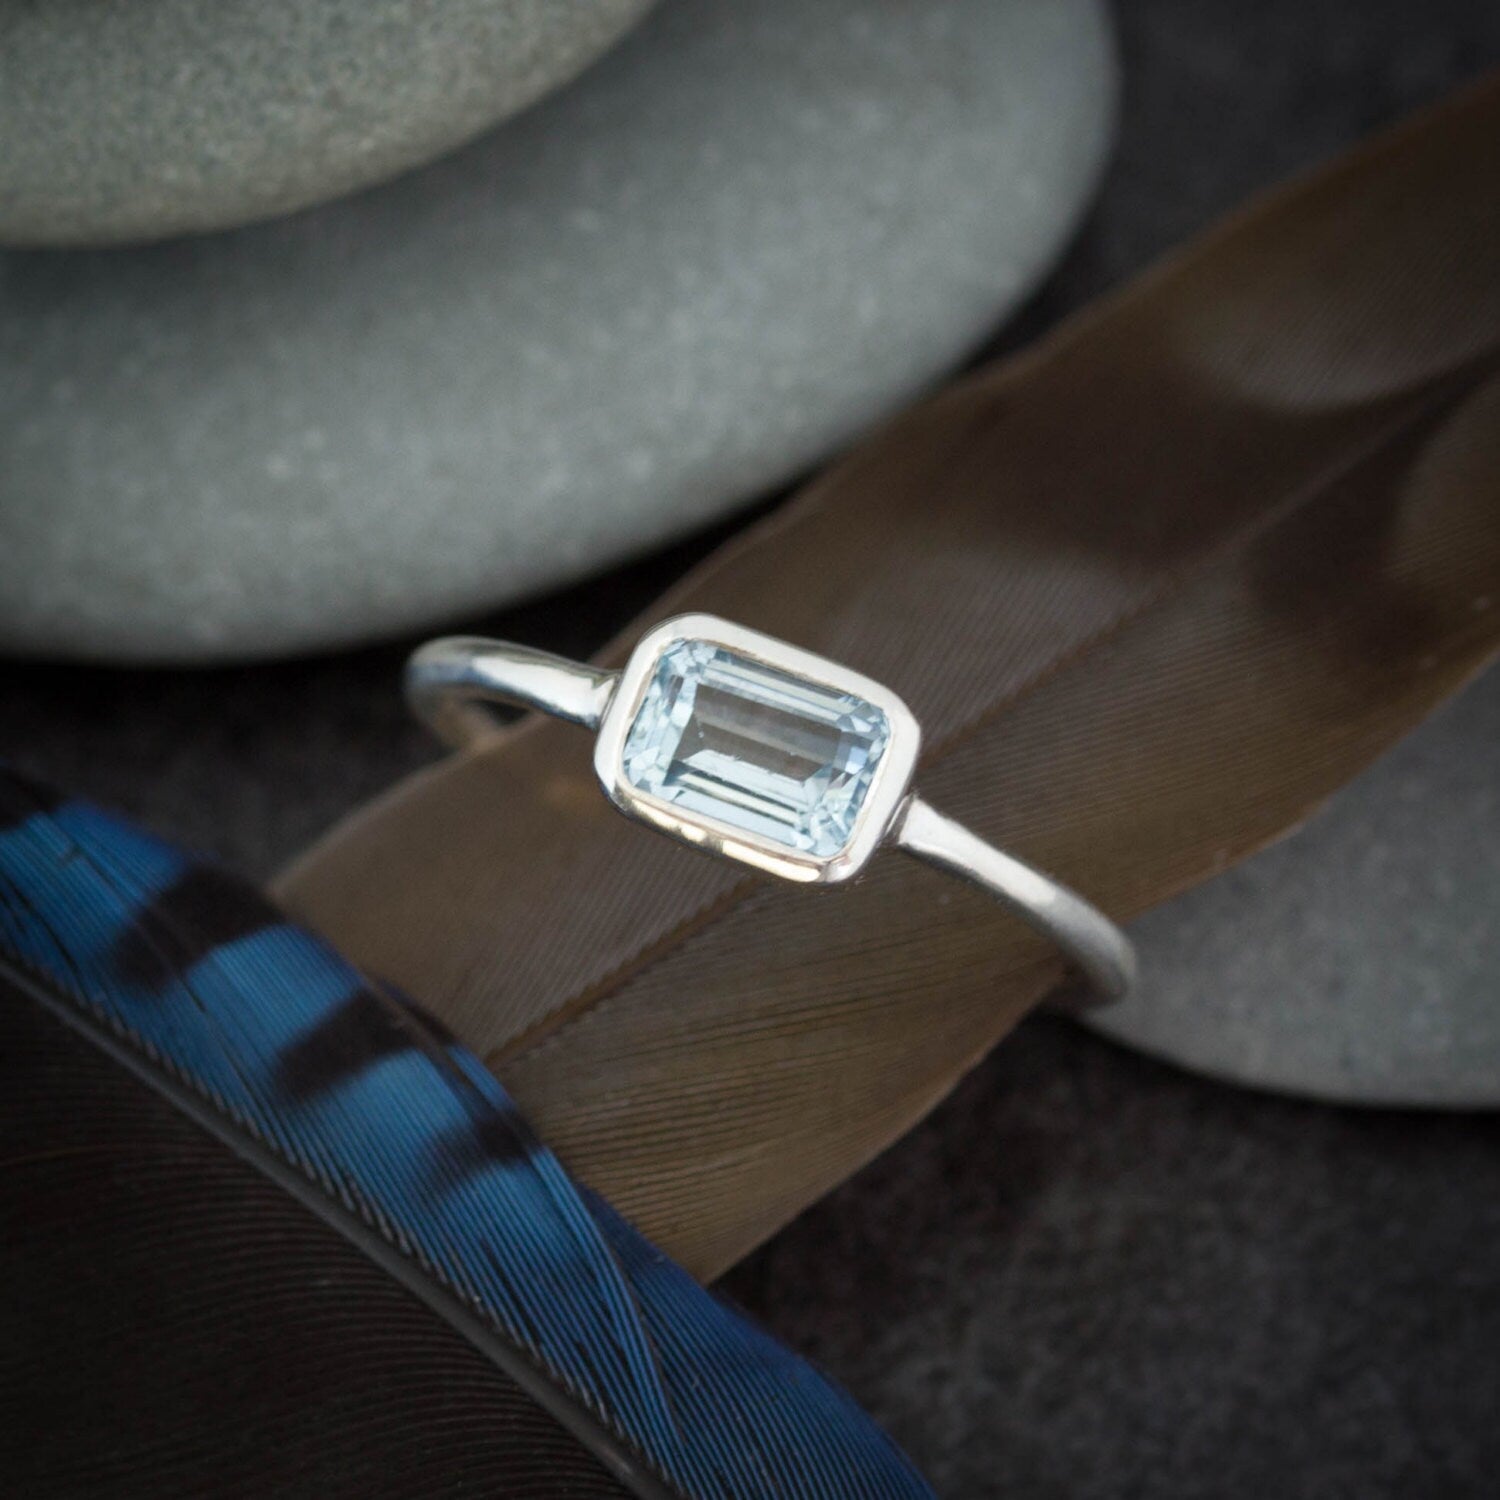 A handmade jewelry piece by Cassin Jewelry featuring a sky blue topaz stone on top of feathers, crafted with sterling silver.